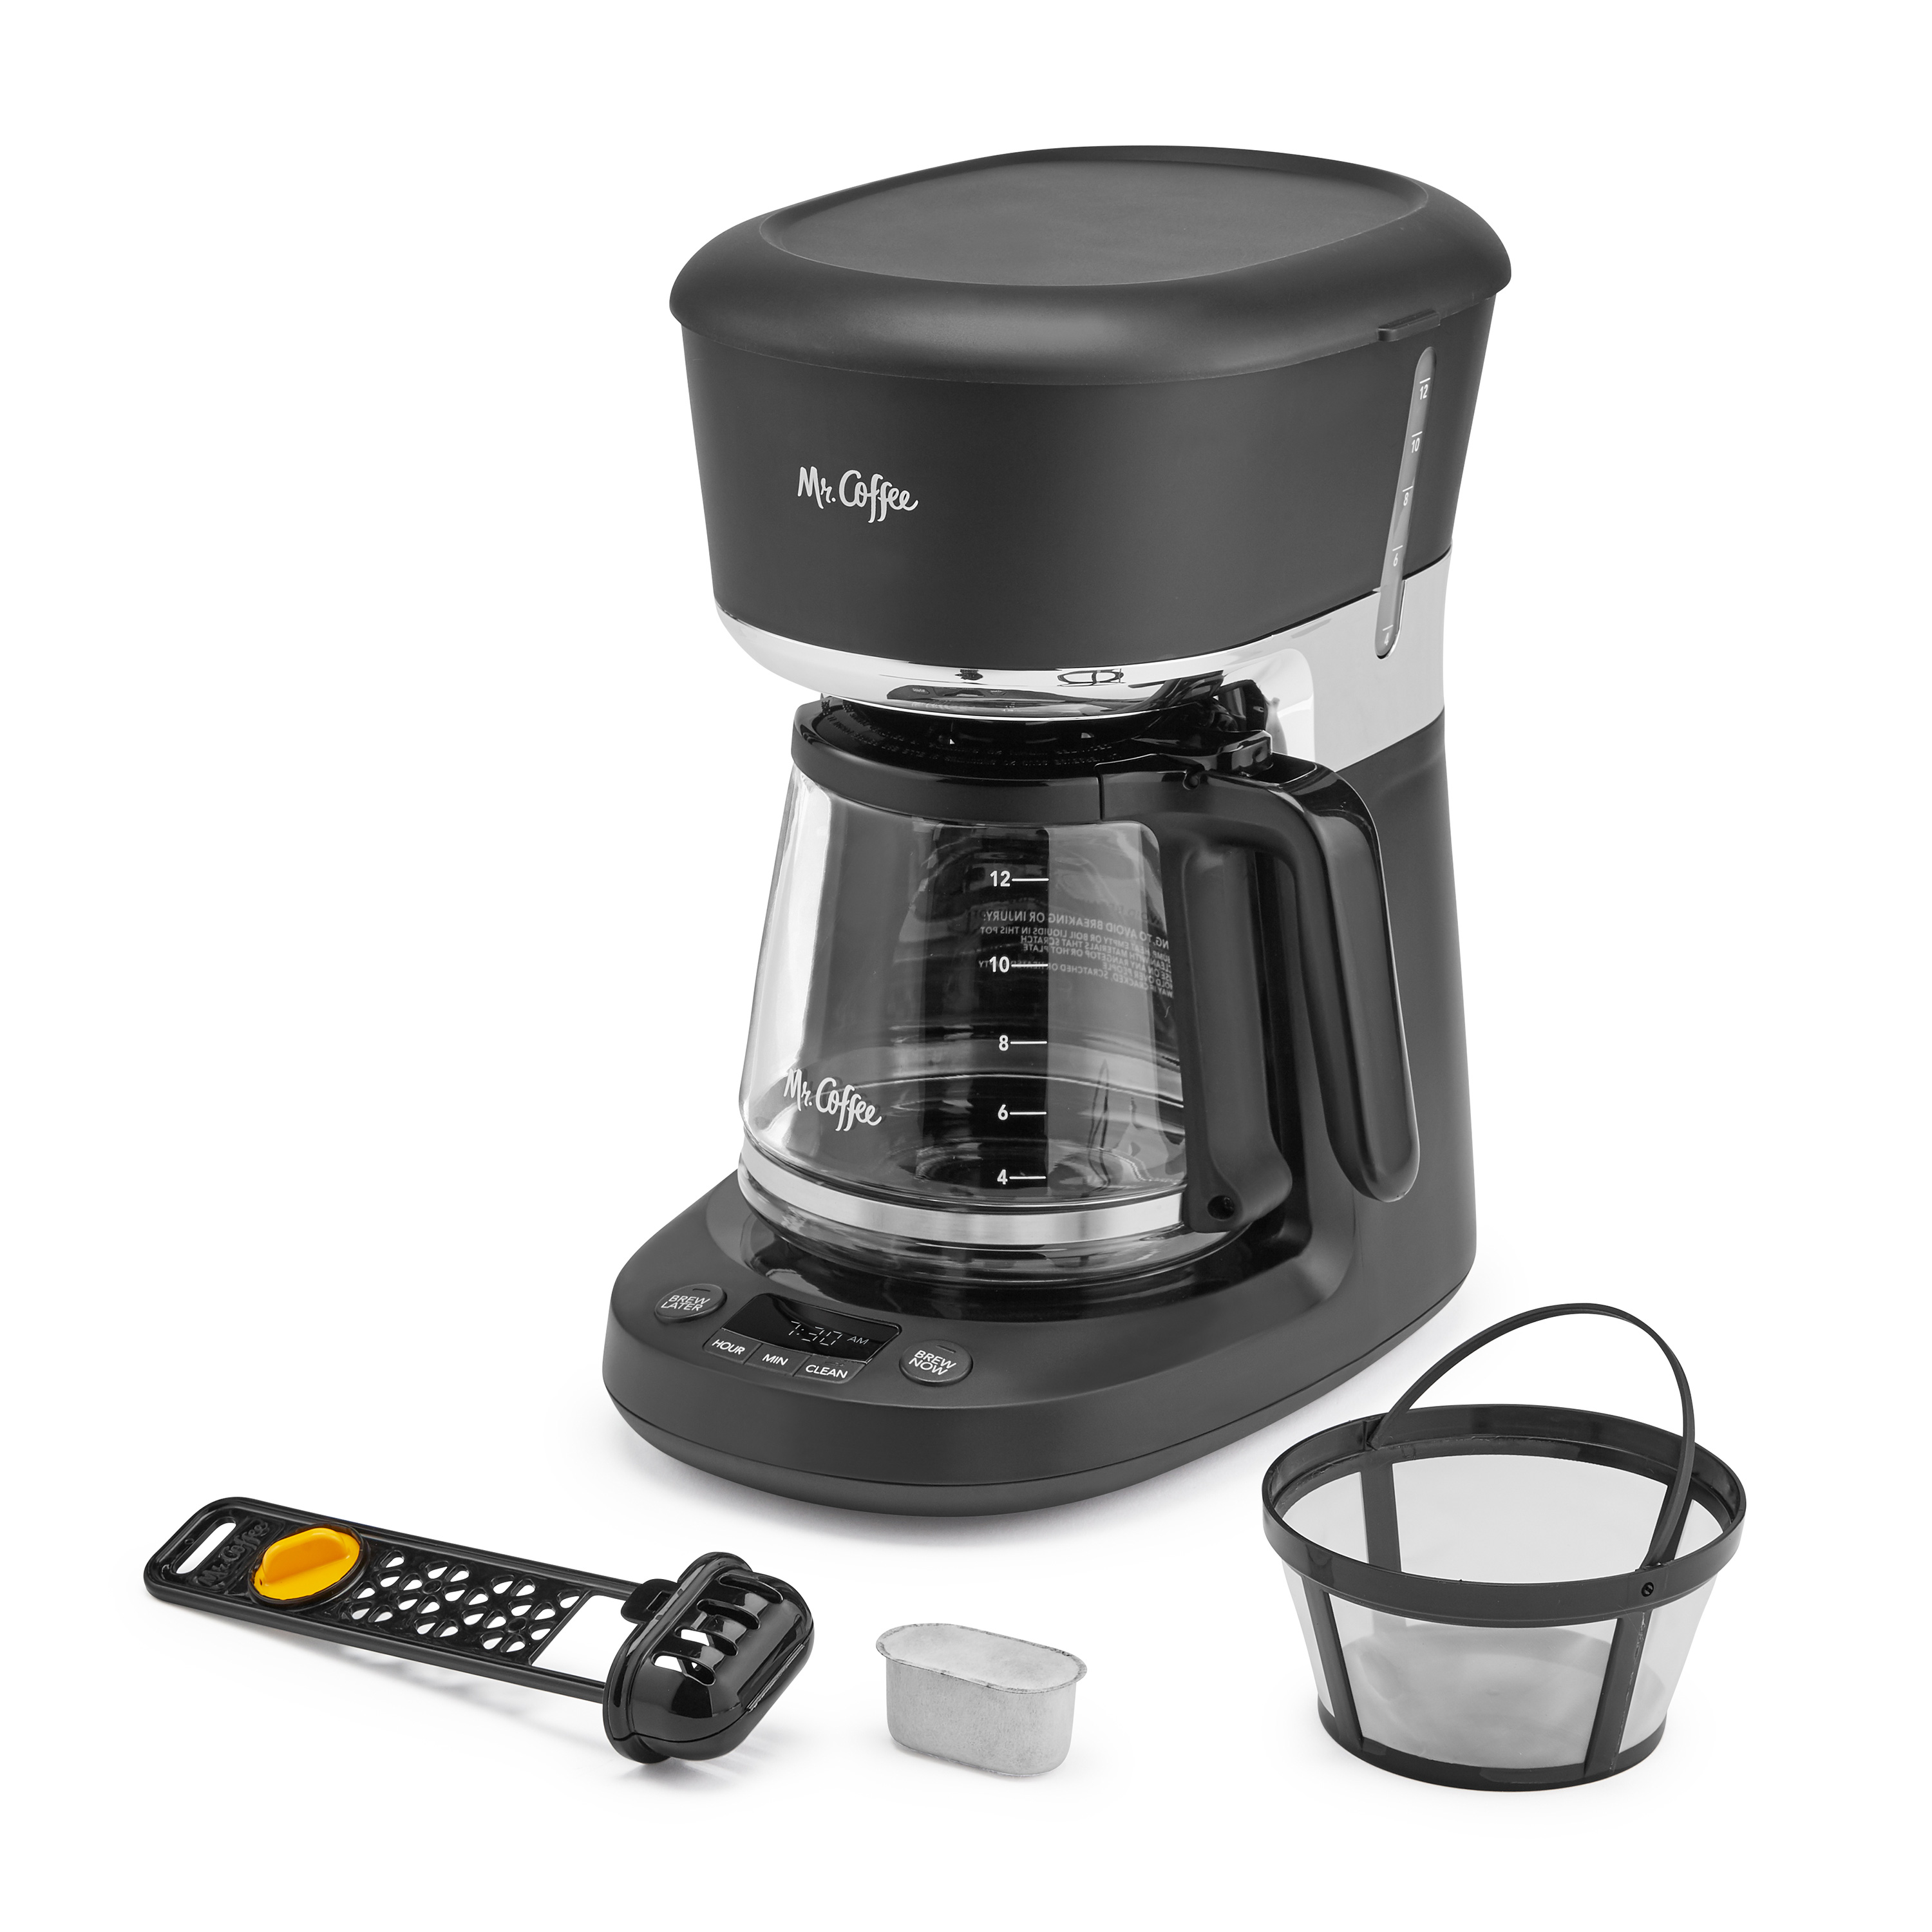 Mr. Coffee 12 Cup Programmable Coffee Maker with Dishwashable Design, Black/Chrome - image 1 of 9